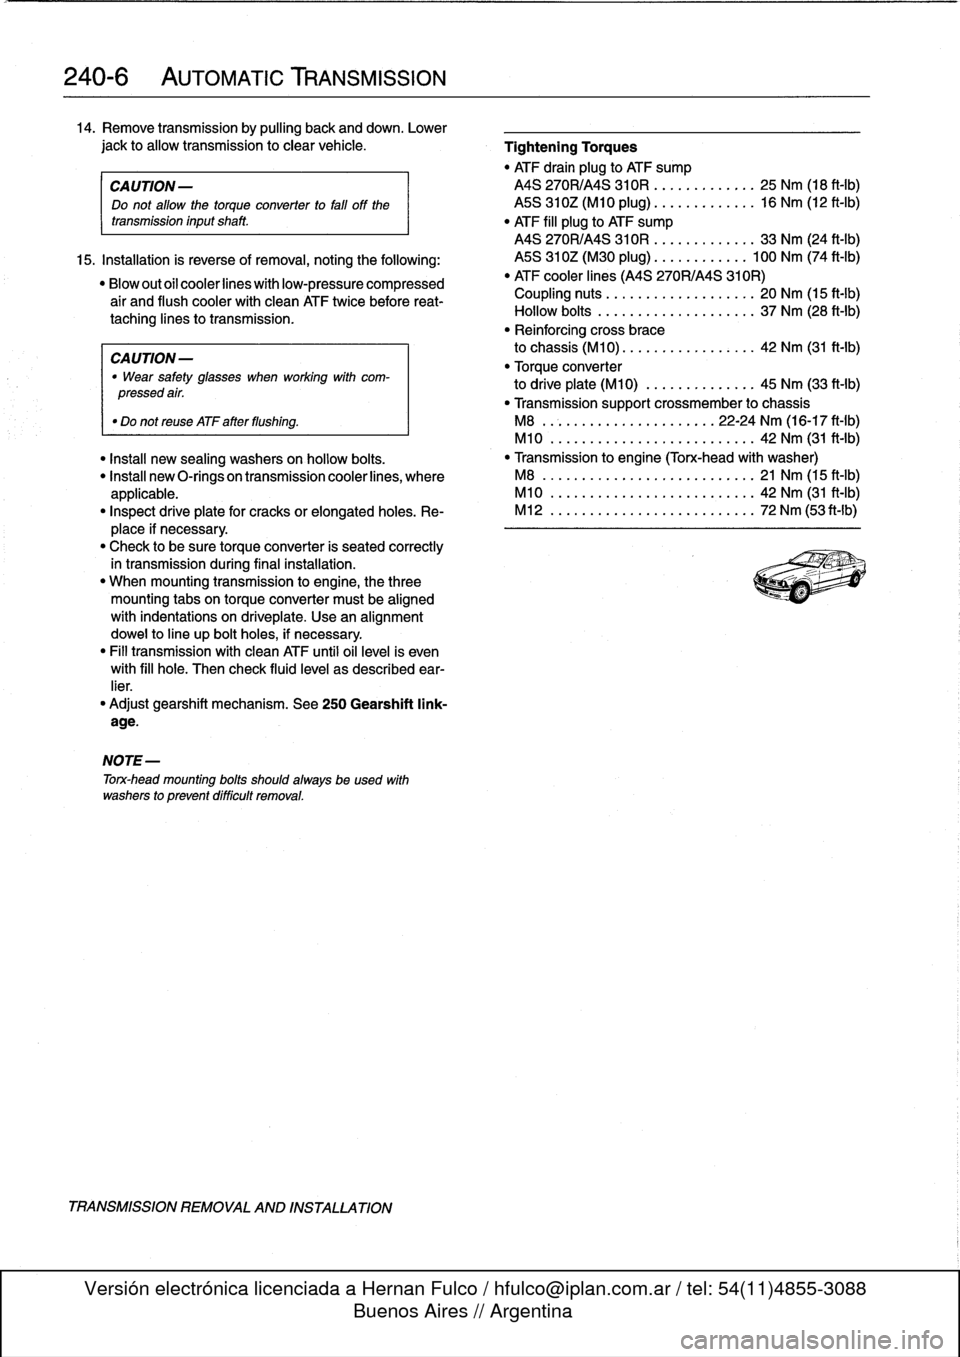 BMW 325i 1993 E36 Service Manual 
240-
6

	

AUTOMATIC
TRANSMISSION

14
.
Remove
transmission
by
pulling
back
and
down
.
Lower

jack
to
allow
transmission
to
clear
vehicle
.

	

Tightening
Torques

"
ATF
drain
plug
to
ATF
sump

CA
UT